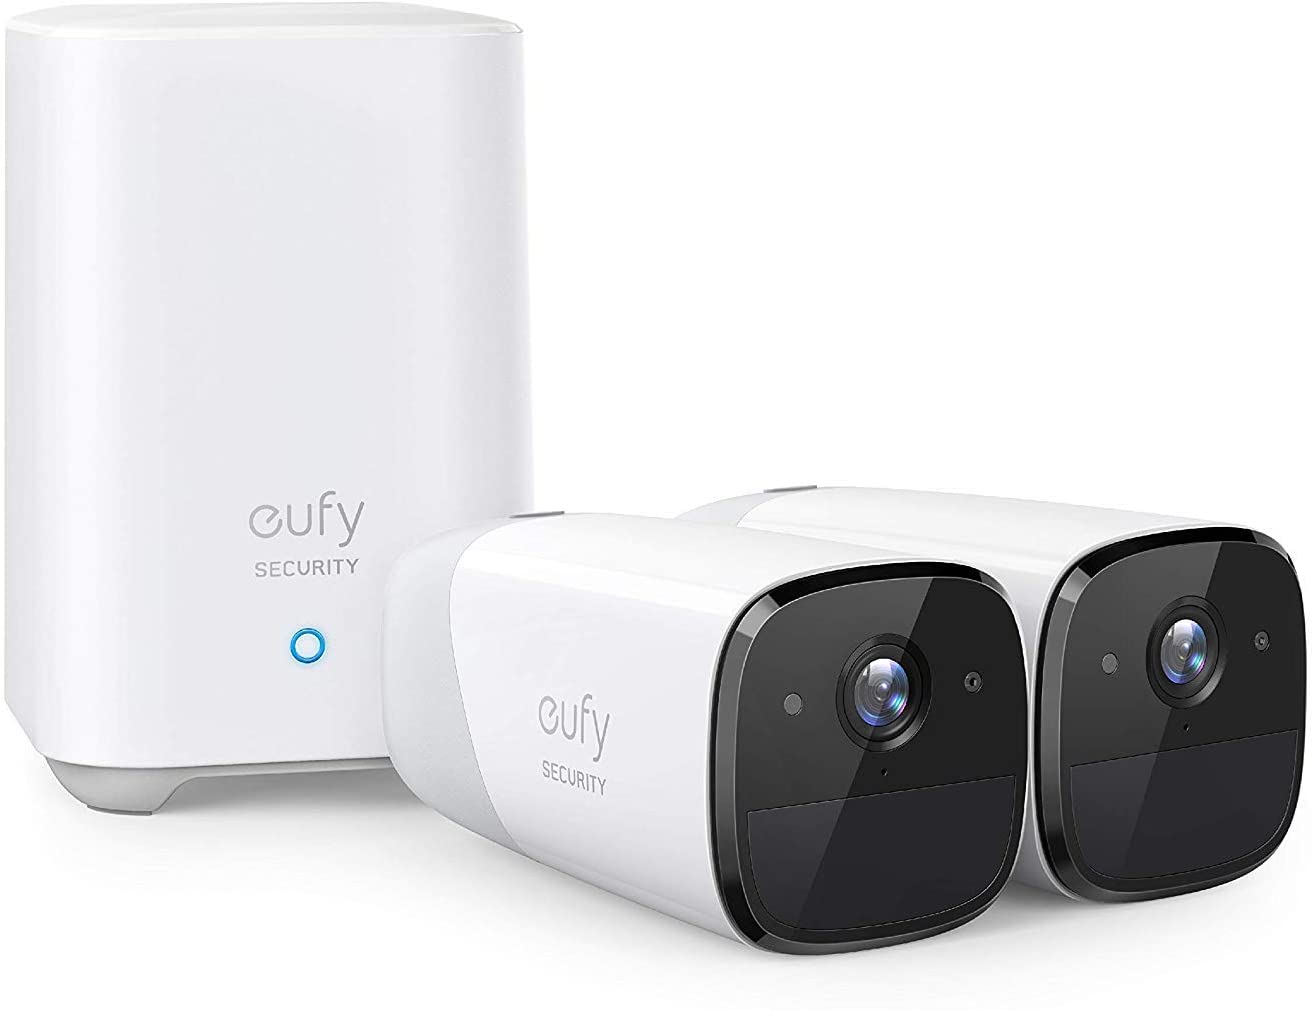 Eufy Security eufyCam 2 wireless home security cameras, 365 days battery life, HD 1080p, IP67, night vision, compatible with Amazon Alexa, 2 camera kit